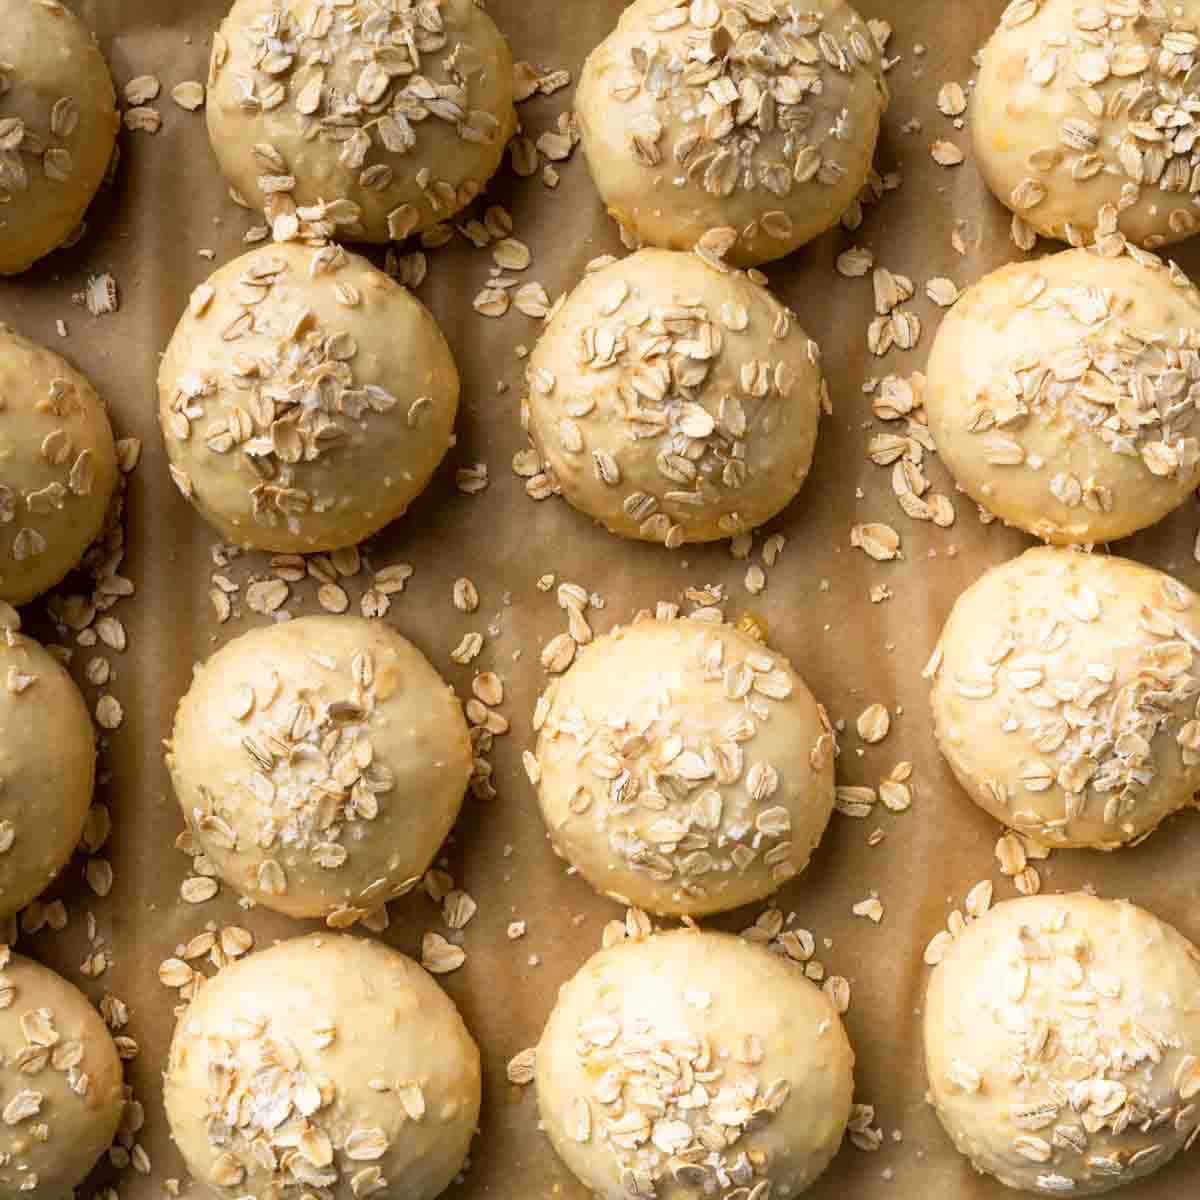 Unbaked round rolls sprinkled with old fashioned rolled oats and salt